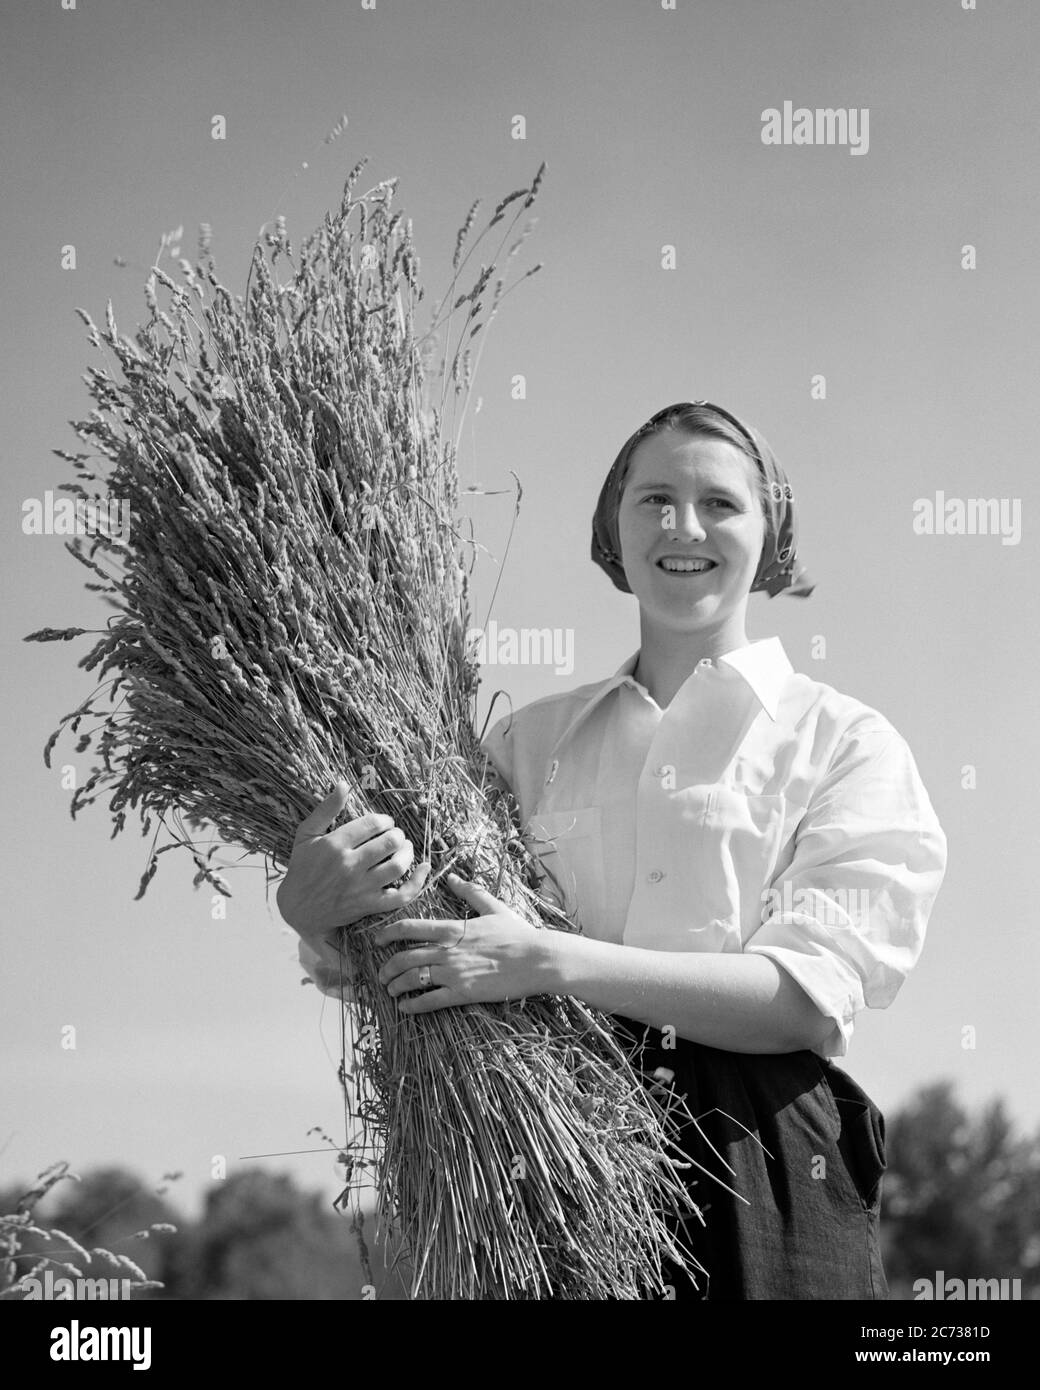 Wholesome women Black and White Stock Photos & Images - Alamy